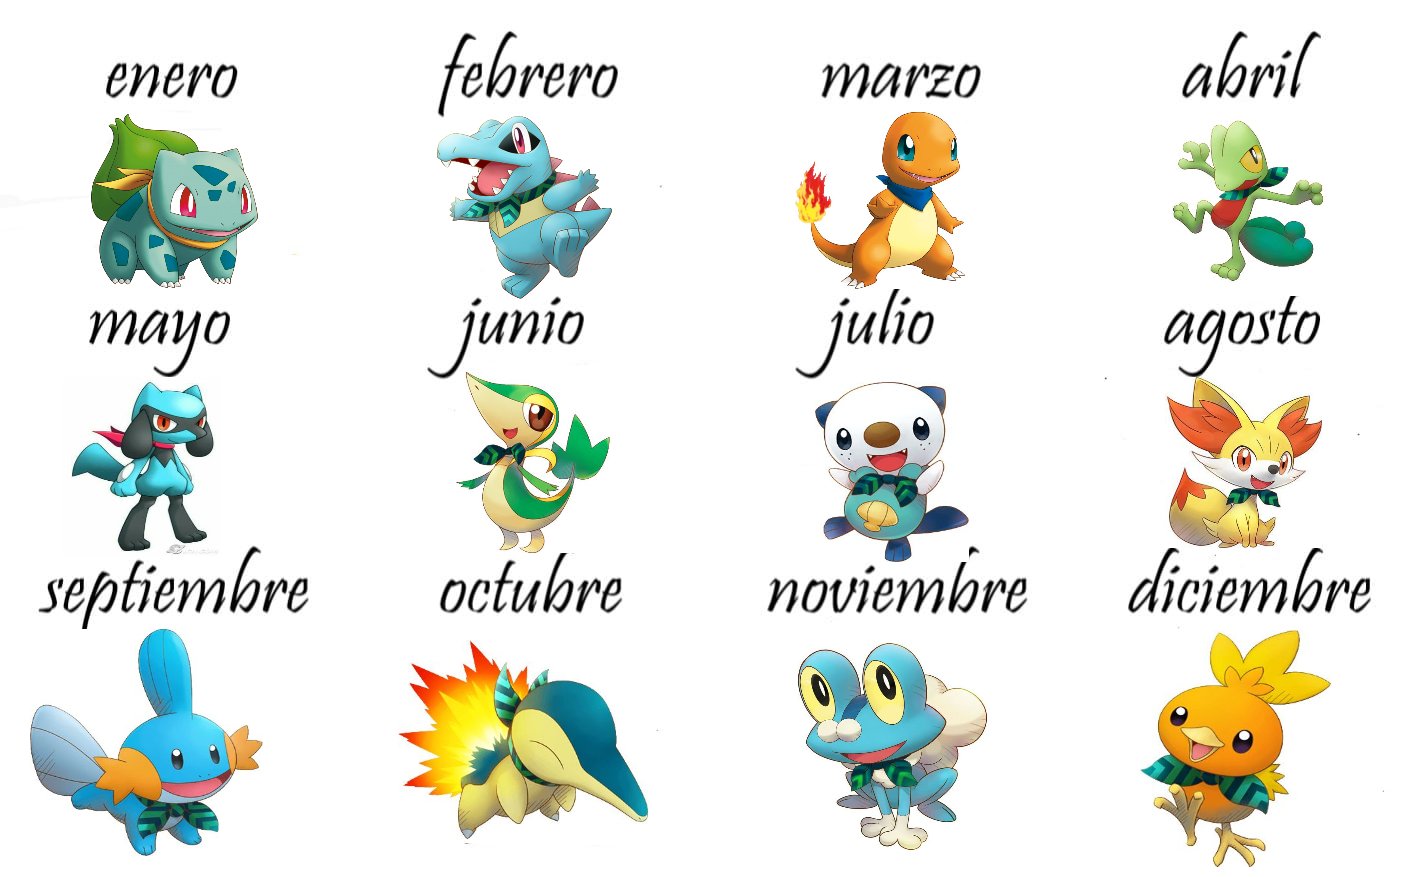 Makio & JRoses  pokeos.com on X: [1/10] ALL RETURNING POKÉMON IN SCARLET  & VIOLET ✨ ￼ Full Pokédex with all the information released so far (July  28) Open the thread for